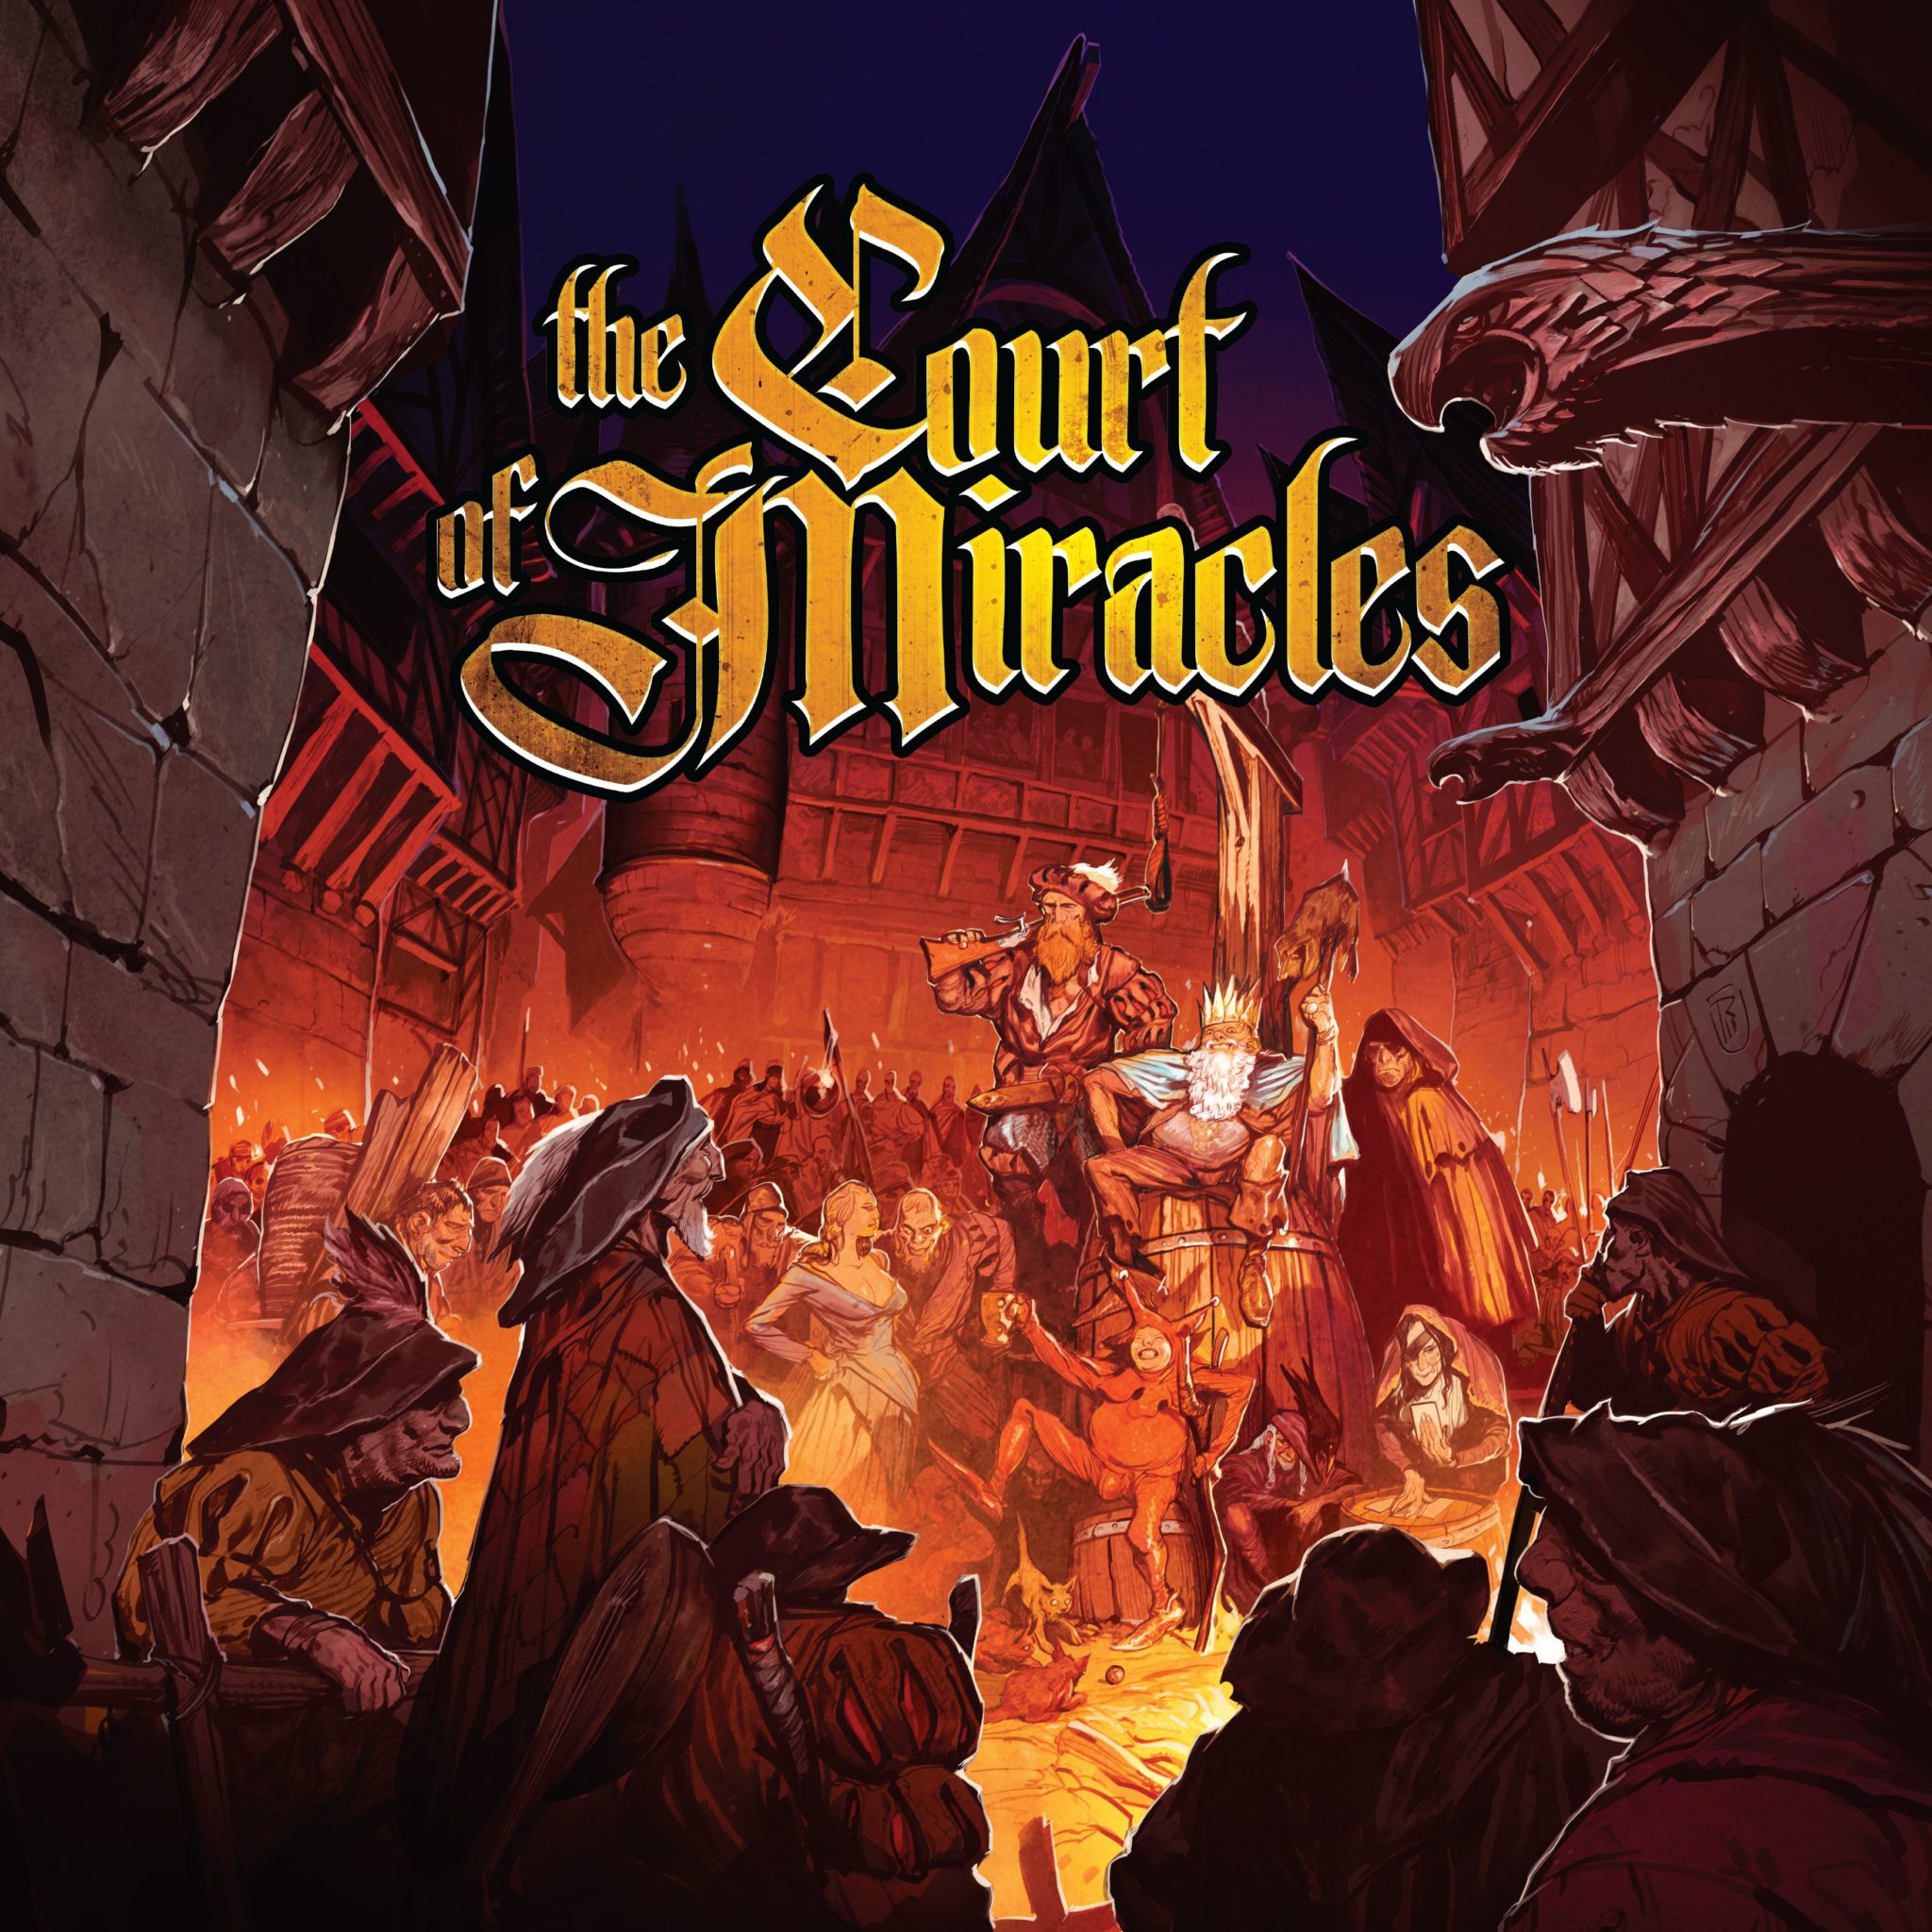 The Court of Miracles cover art